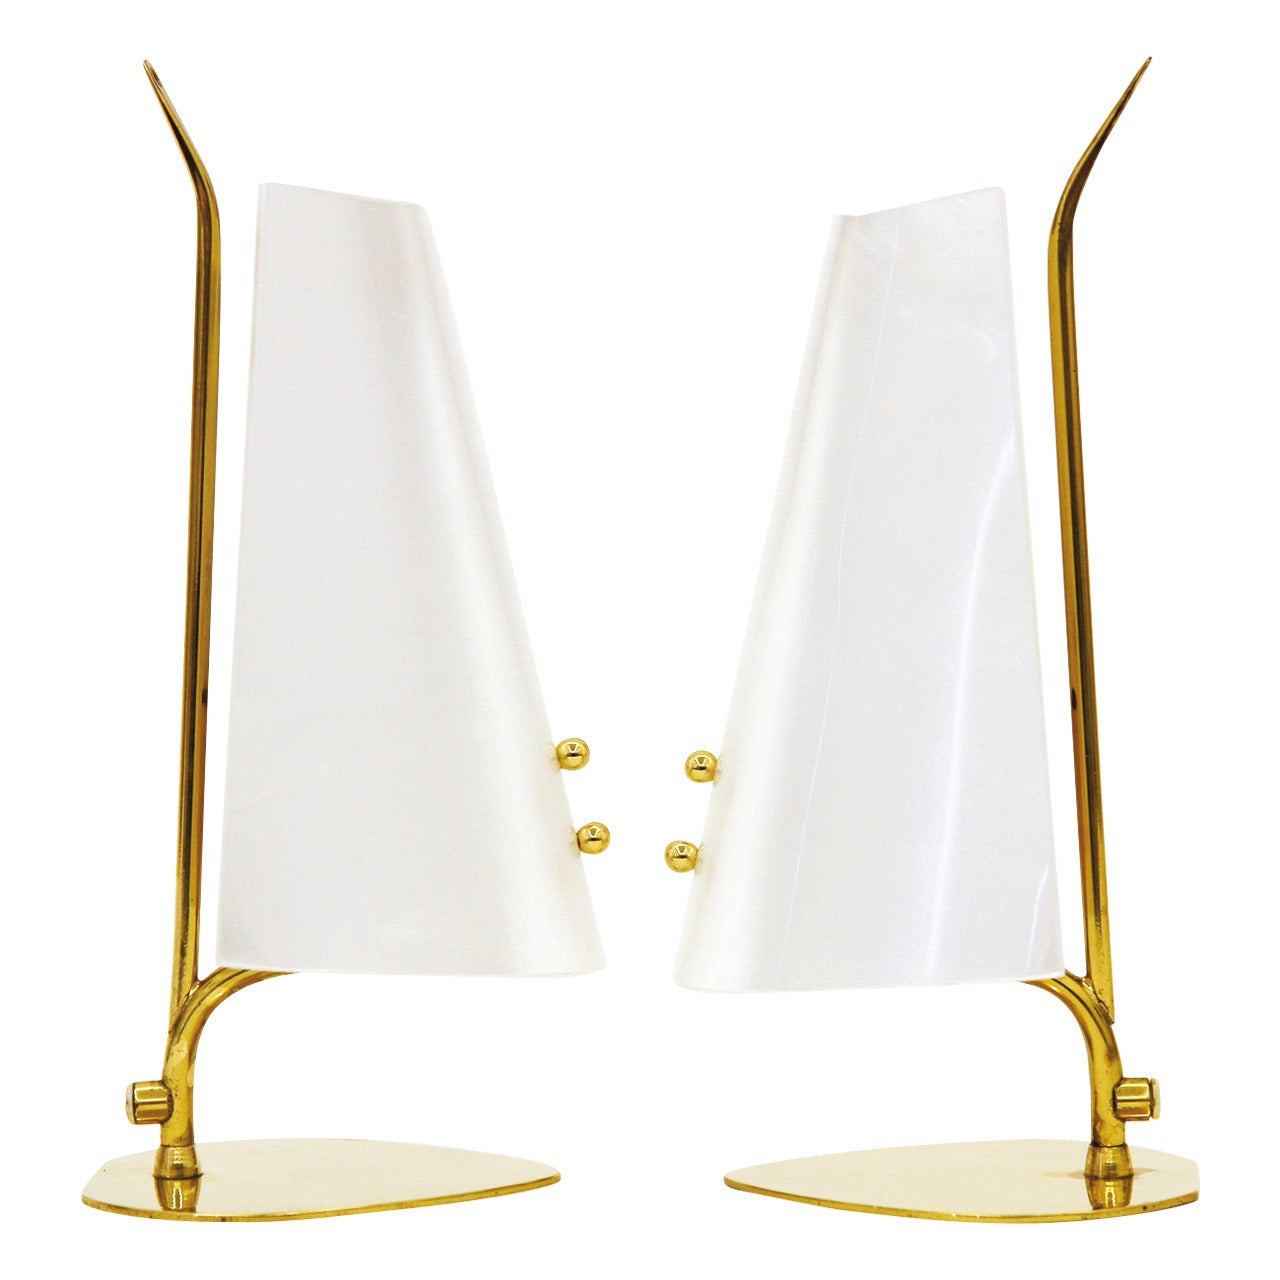 Unique Pair of Brass and Perspex Table Lamps